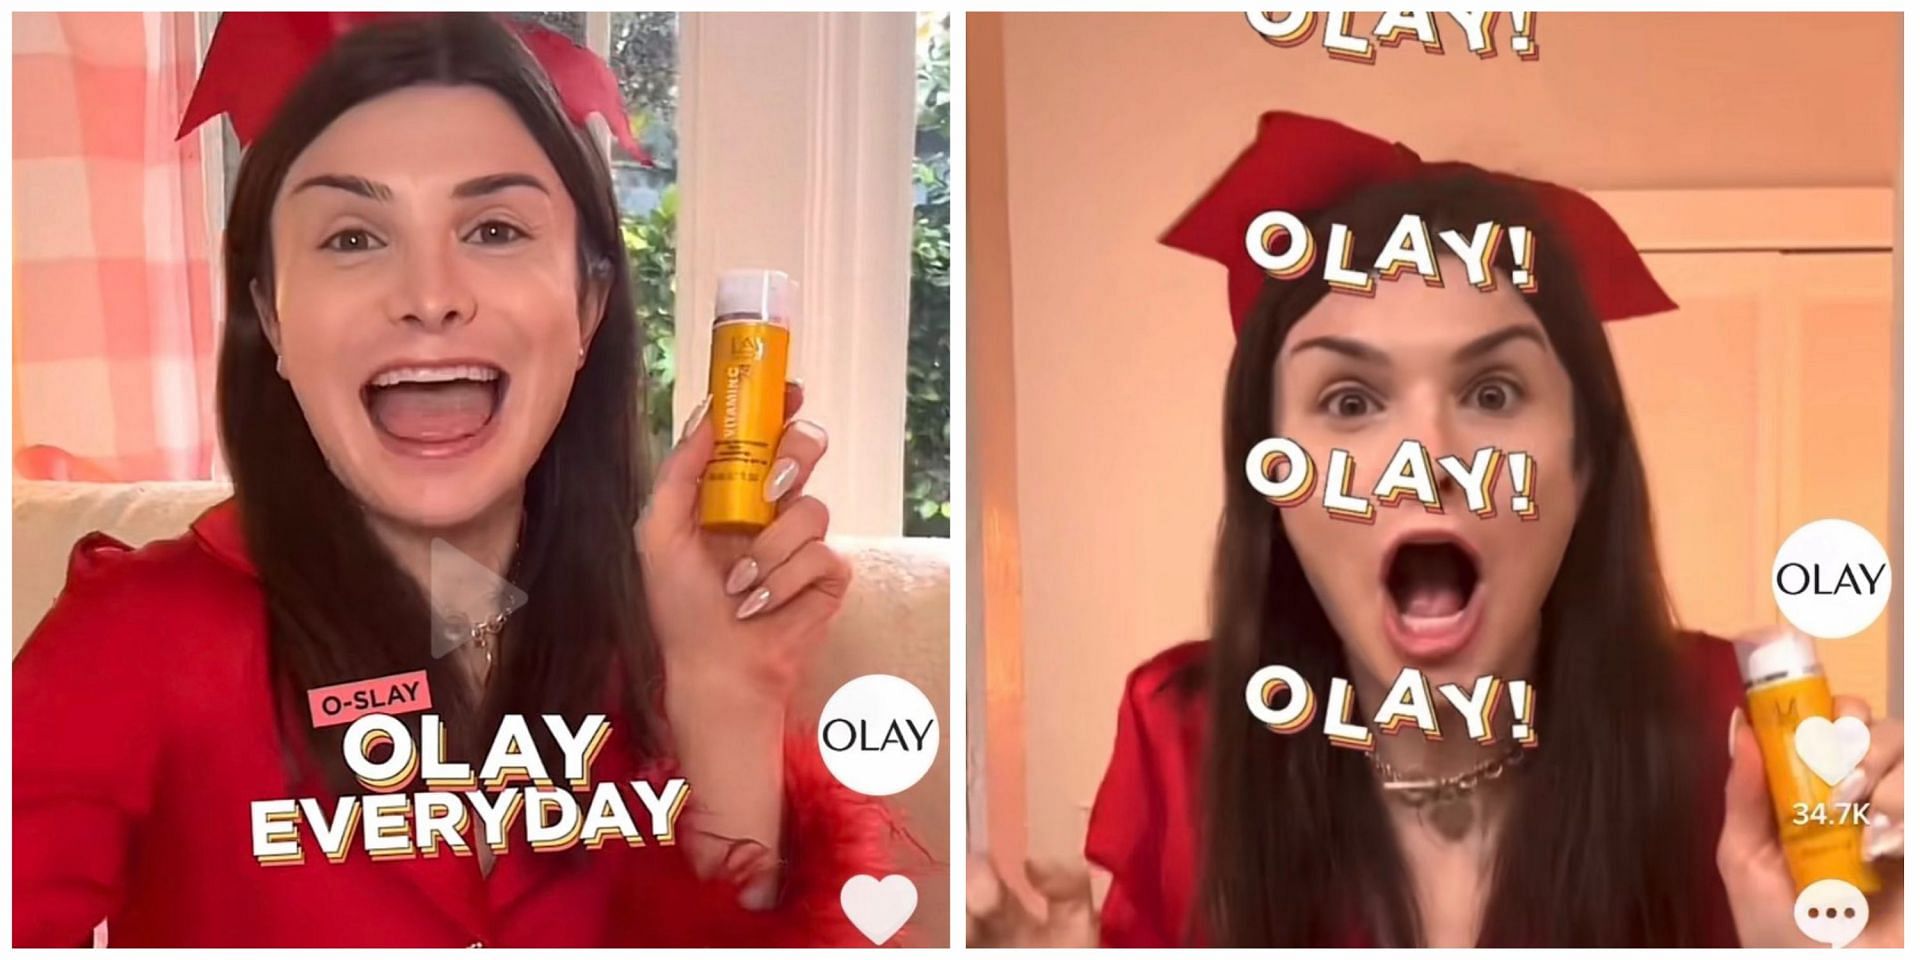 Social media bash Olay and talk about boycotting the brand, after Bud Light and Nike, as Olay too collaborates with Dylan Mulvaney. (Image via TikTok)